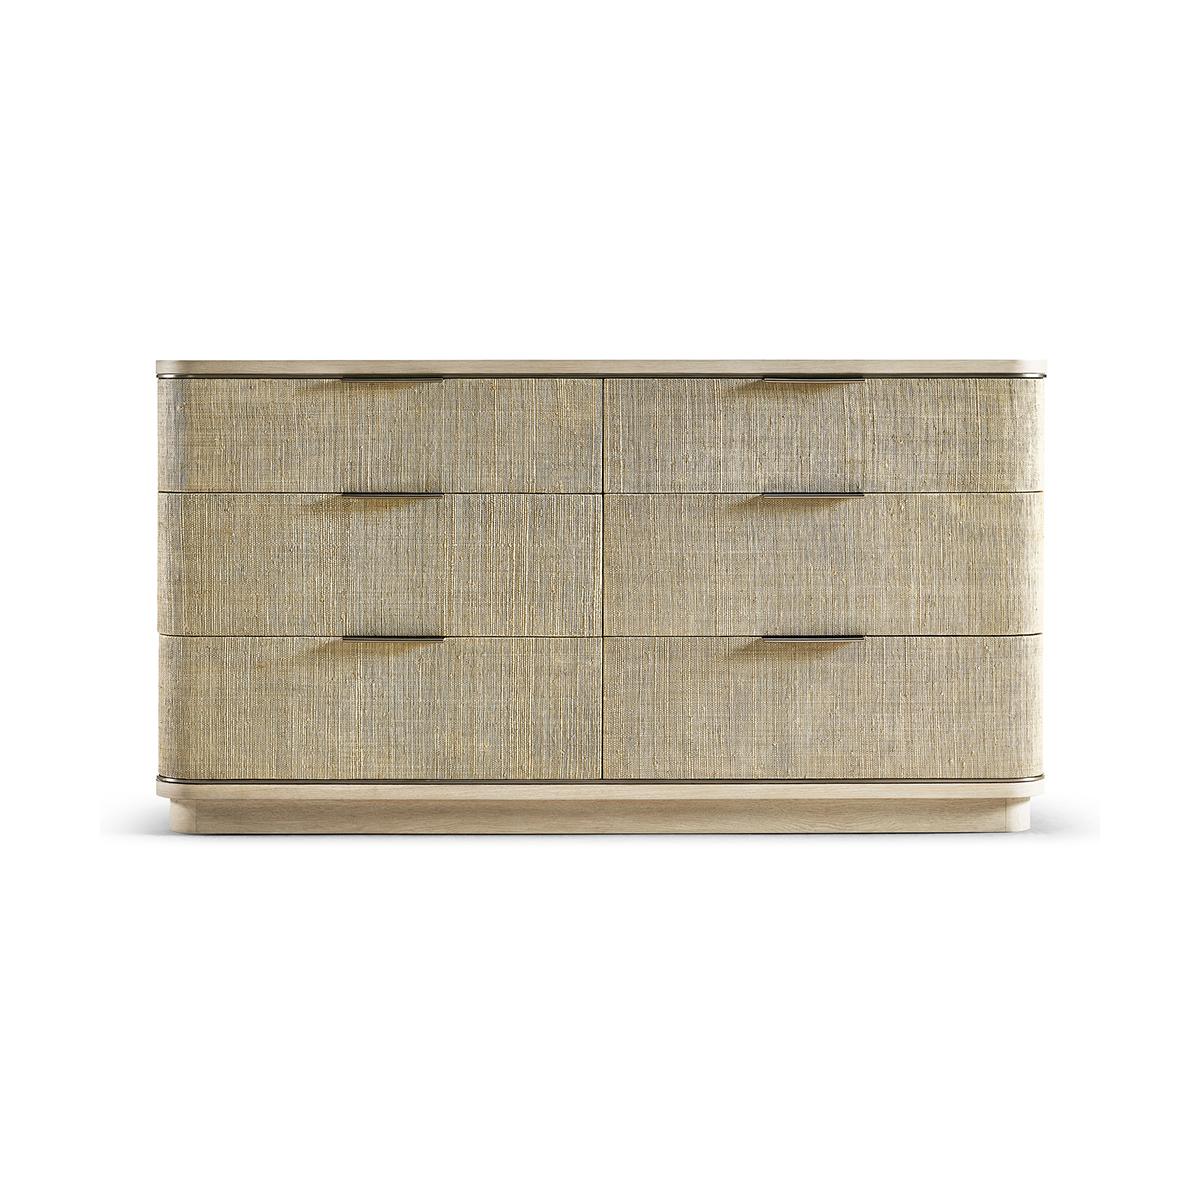 Modern woven double dresser, a beautifully crafted piece is born from passion and boasts incredible aesthetic details that are sure to take your breath away.

The dresser's six bleached oak drawers are wrapped in grasscloth, adding a subtle